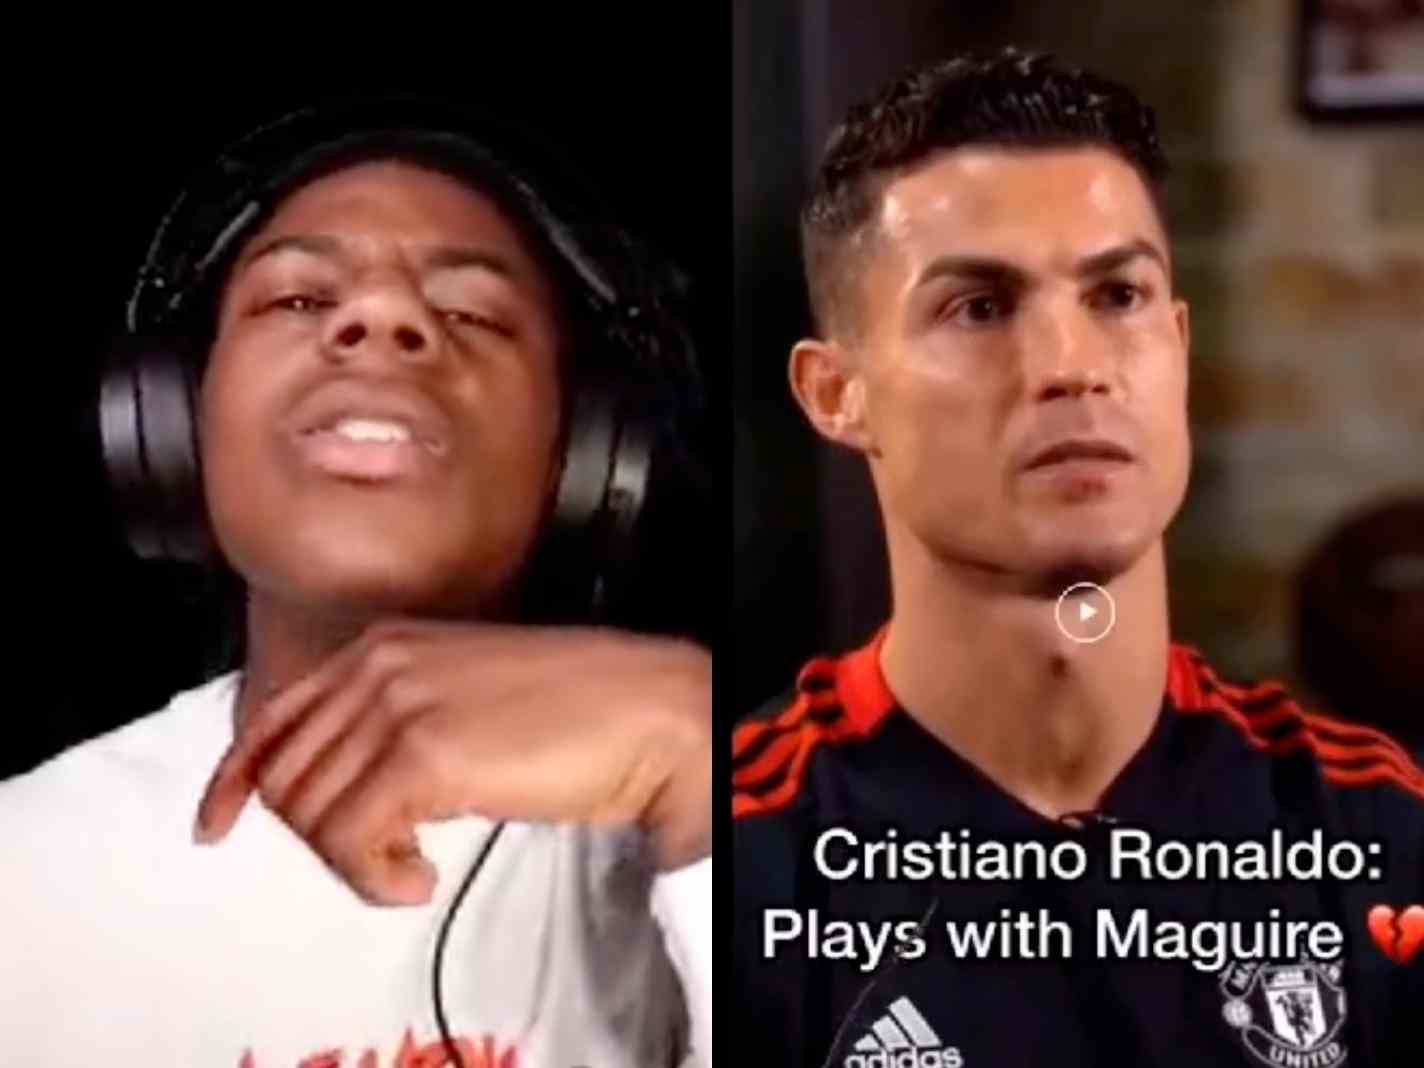 The photo shows a screenshot from YouTuber ishowspeed's live stream where he discusses footballers who play with disability.